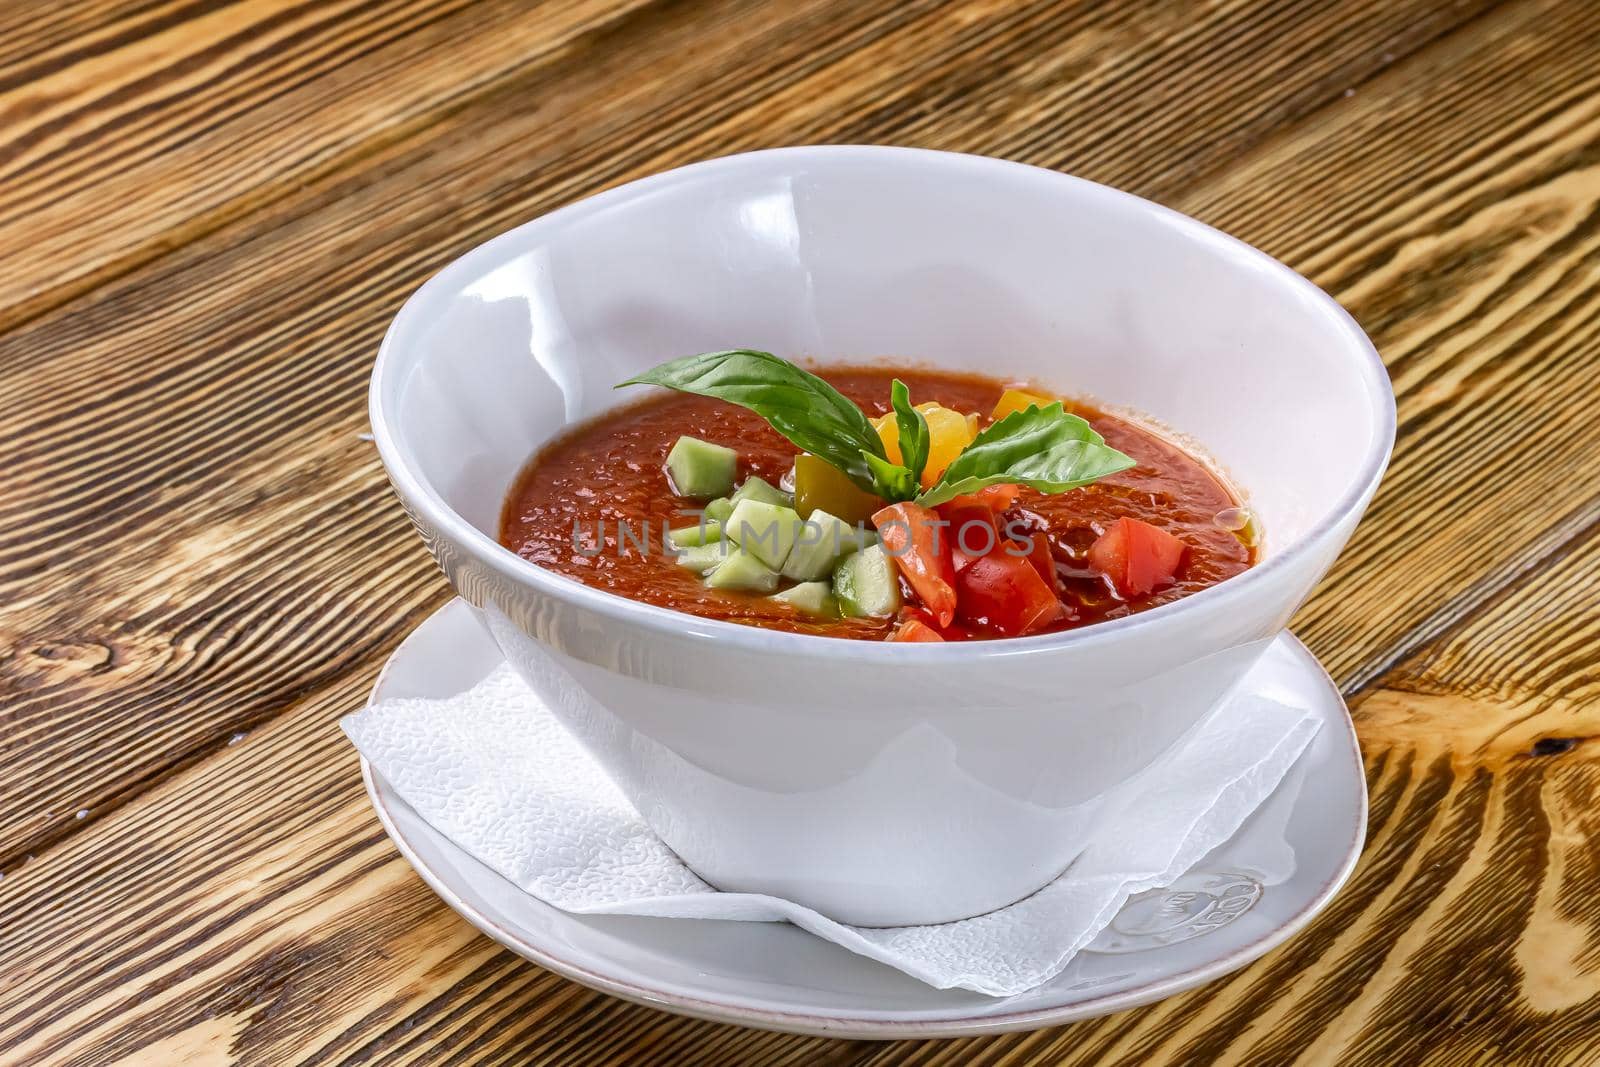 Raw tomato soup, typical food of Spain, served in white bowls with pieces of tomato, cucumber and paprika. Wooden background.